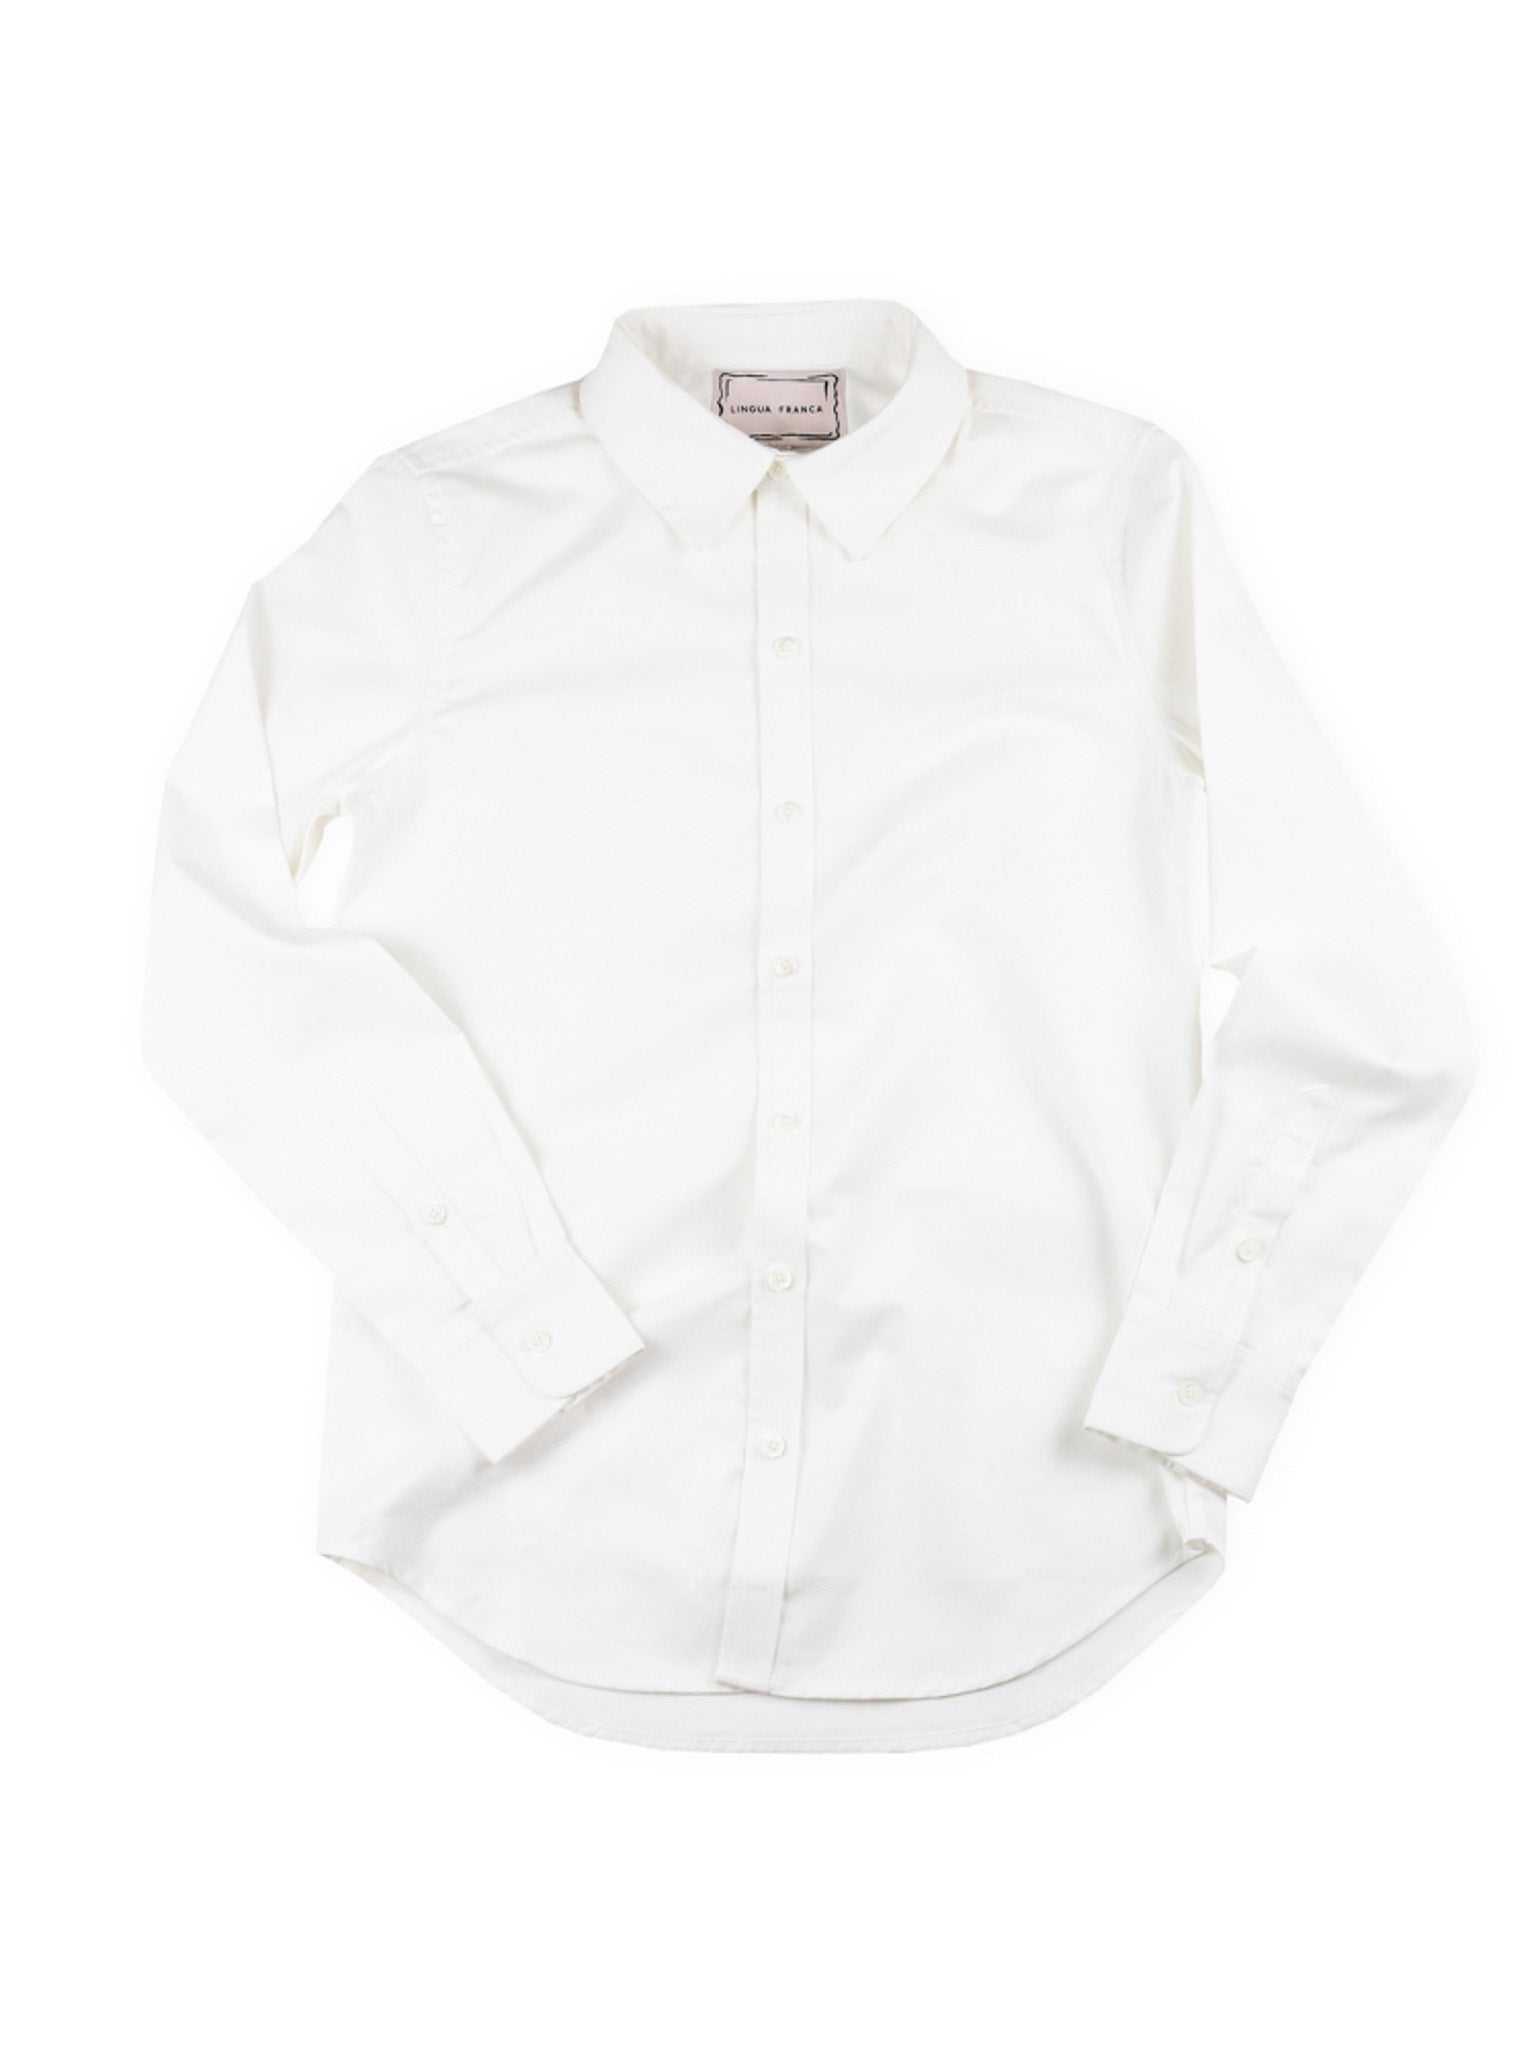 100% Cotton Dress Shirt with Personalized Embroidery Monogram